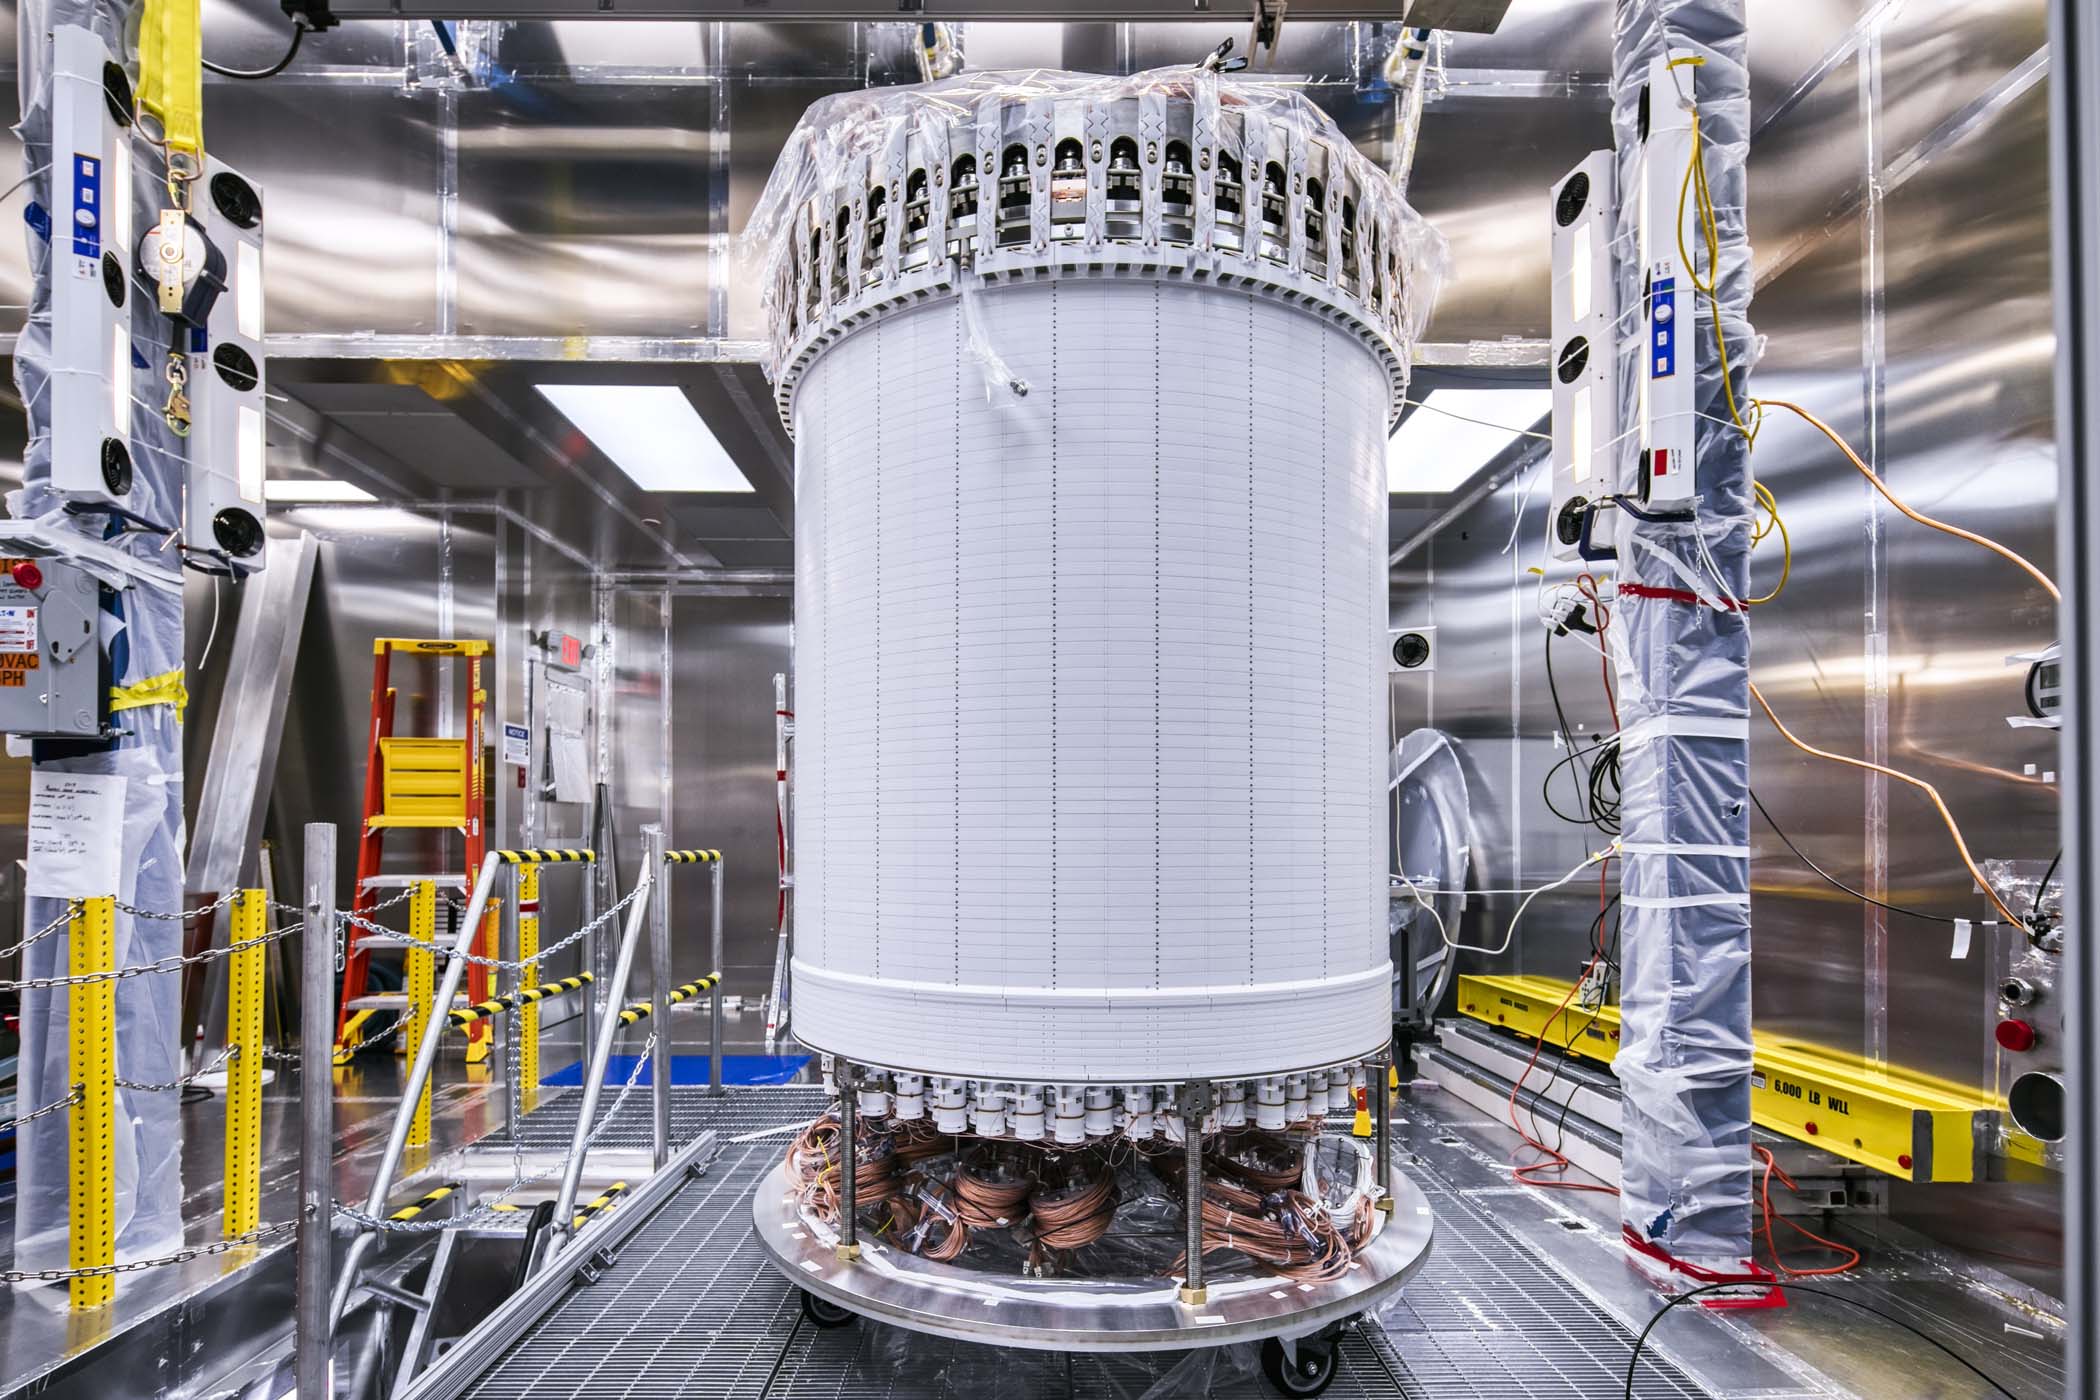 The recently assembled LUX-ZEPLIN xenon detector in the Surface Assembly Lab cleanroom at Sanford Underground Research Facility on July 26, 2019. Photo by Matthew Kapust, Sanford Underground Research Facility.</p></p>
<p><p>The recently assembled LUX-ZEPLIN xenon detector in the Surface Assembly Lab cleanroom at Sanford Underground Research Facility on July 26, 2019. Photo by Matthew Kapust, Sanford Underground Research Facility.